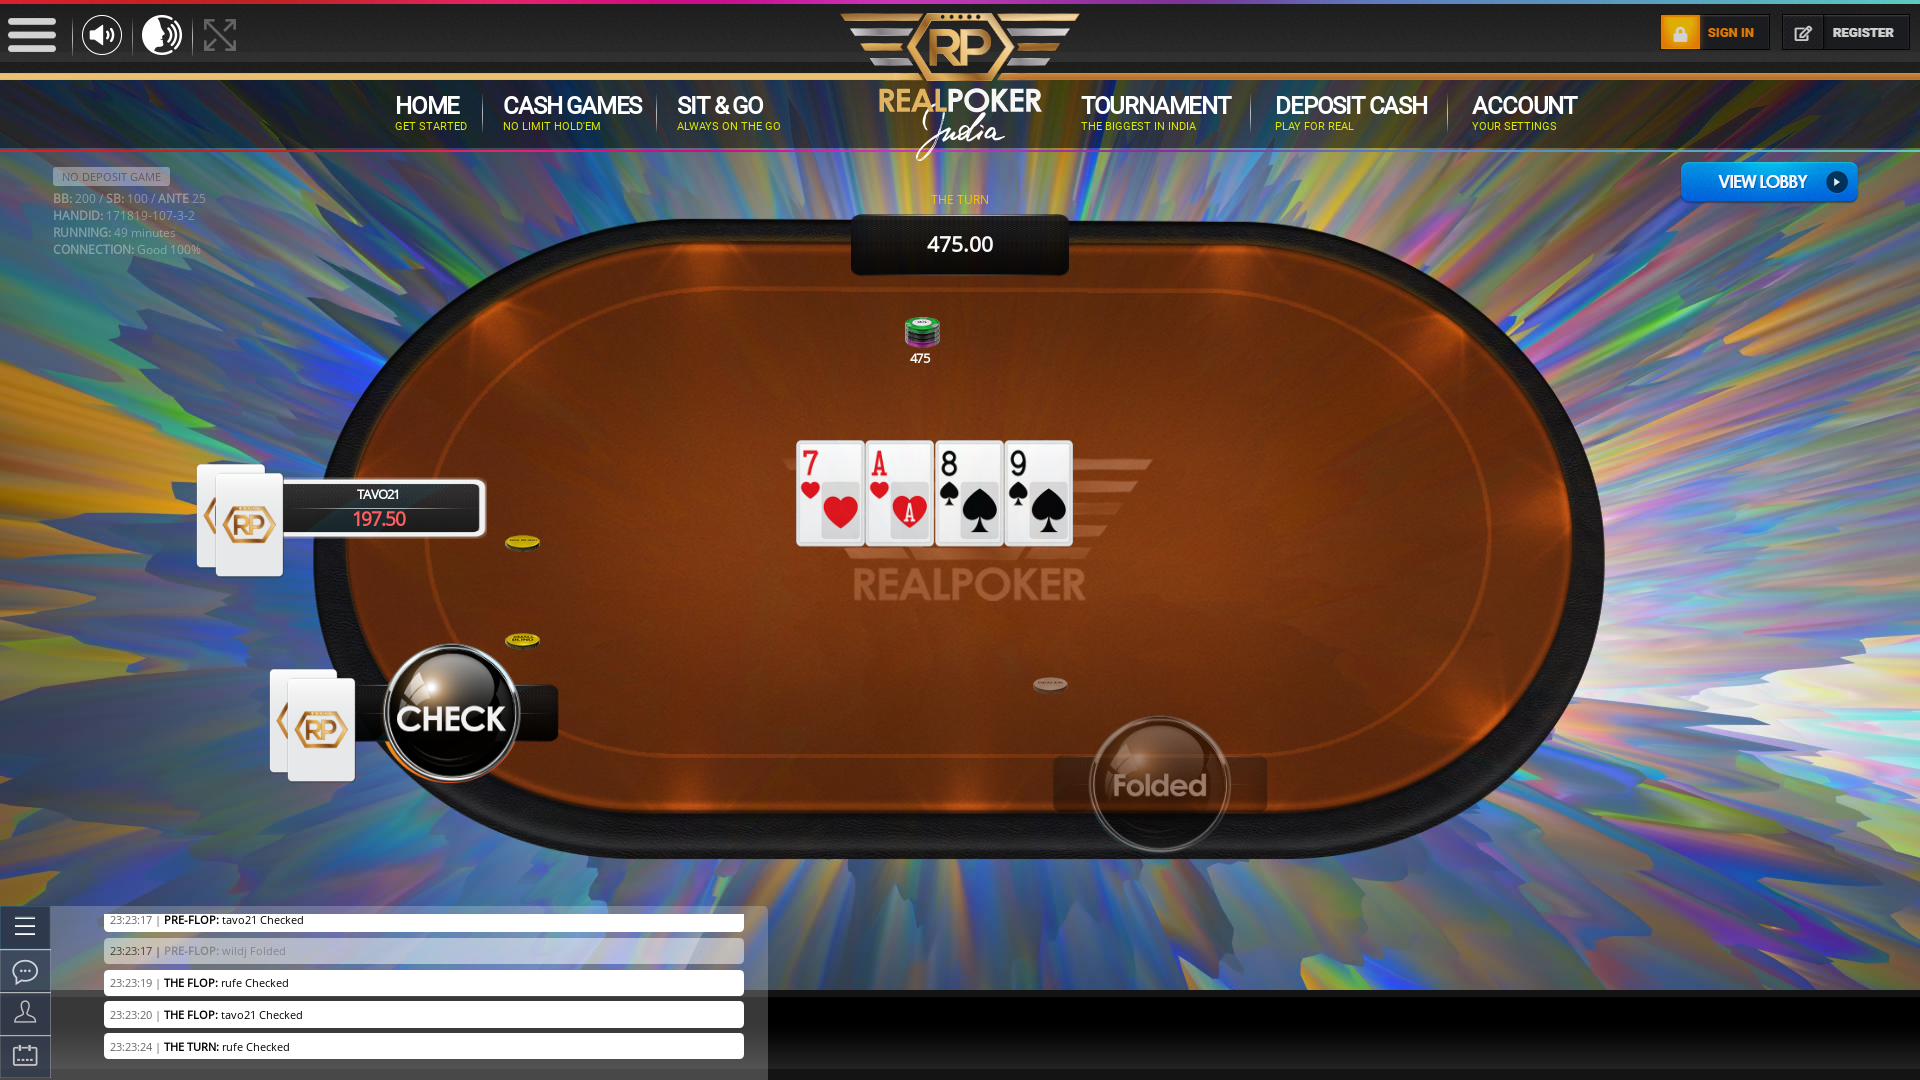 Online poker on a 10 player table in the 49th minute match up